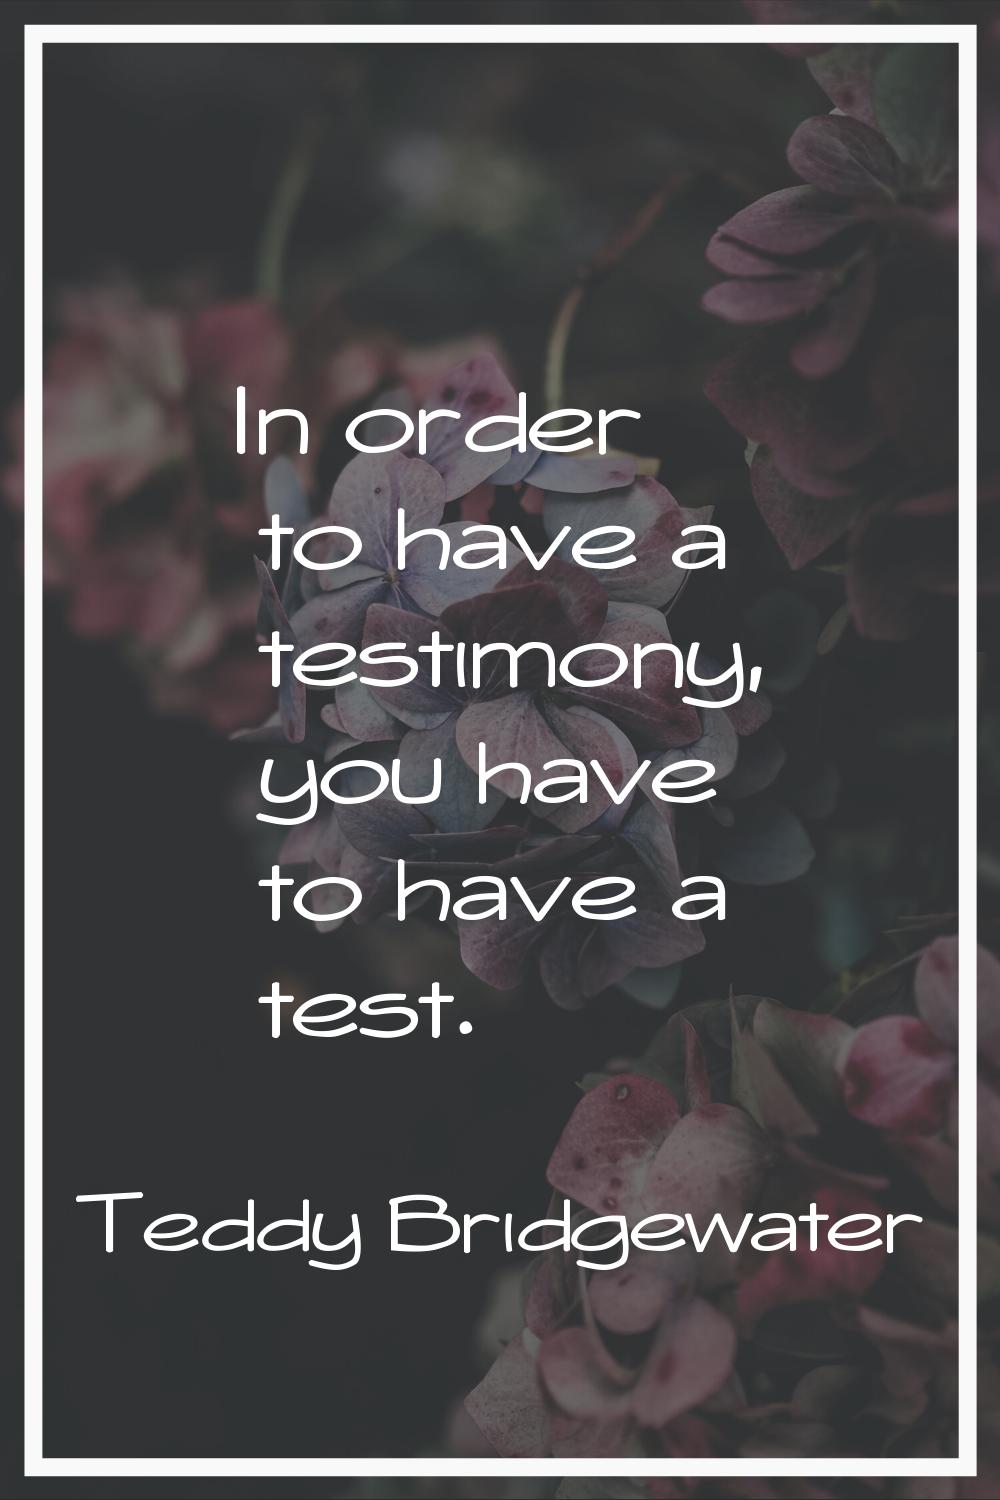 In order to have a testimony, you have to have a test.